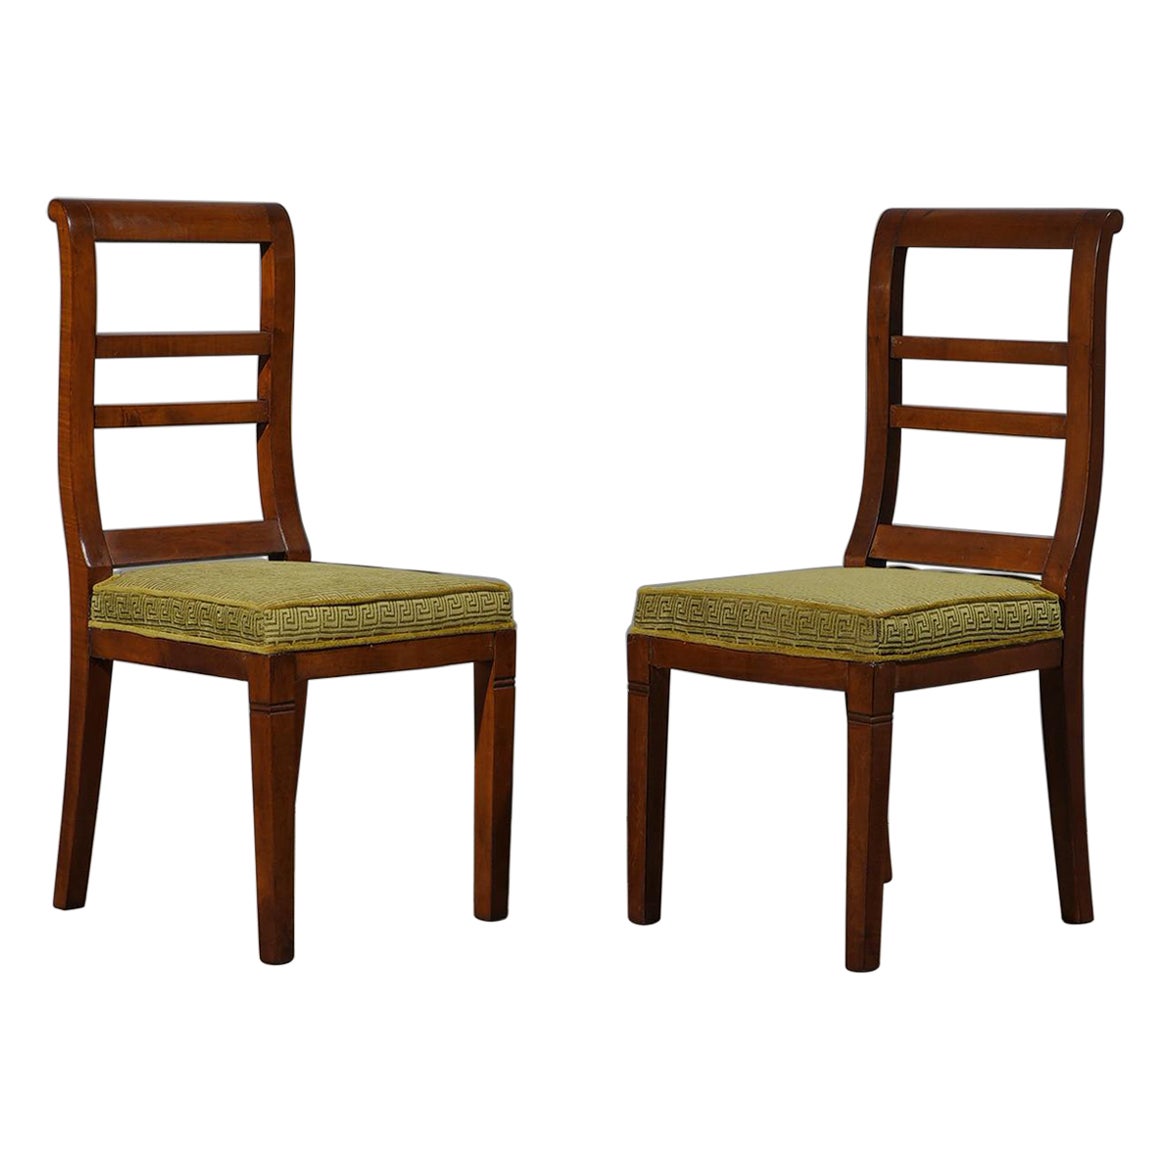 Rare Midcentury Pair Oak X-frame Dagobert Armchairs Leather Seats and Back Sale at 1stDibs